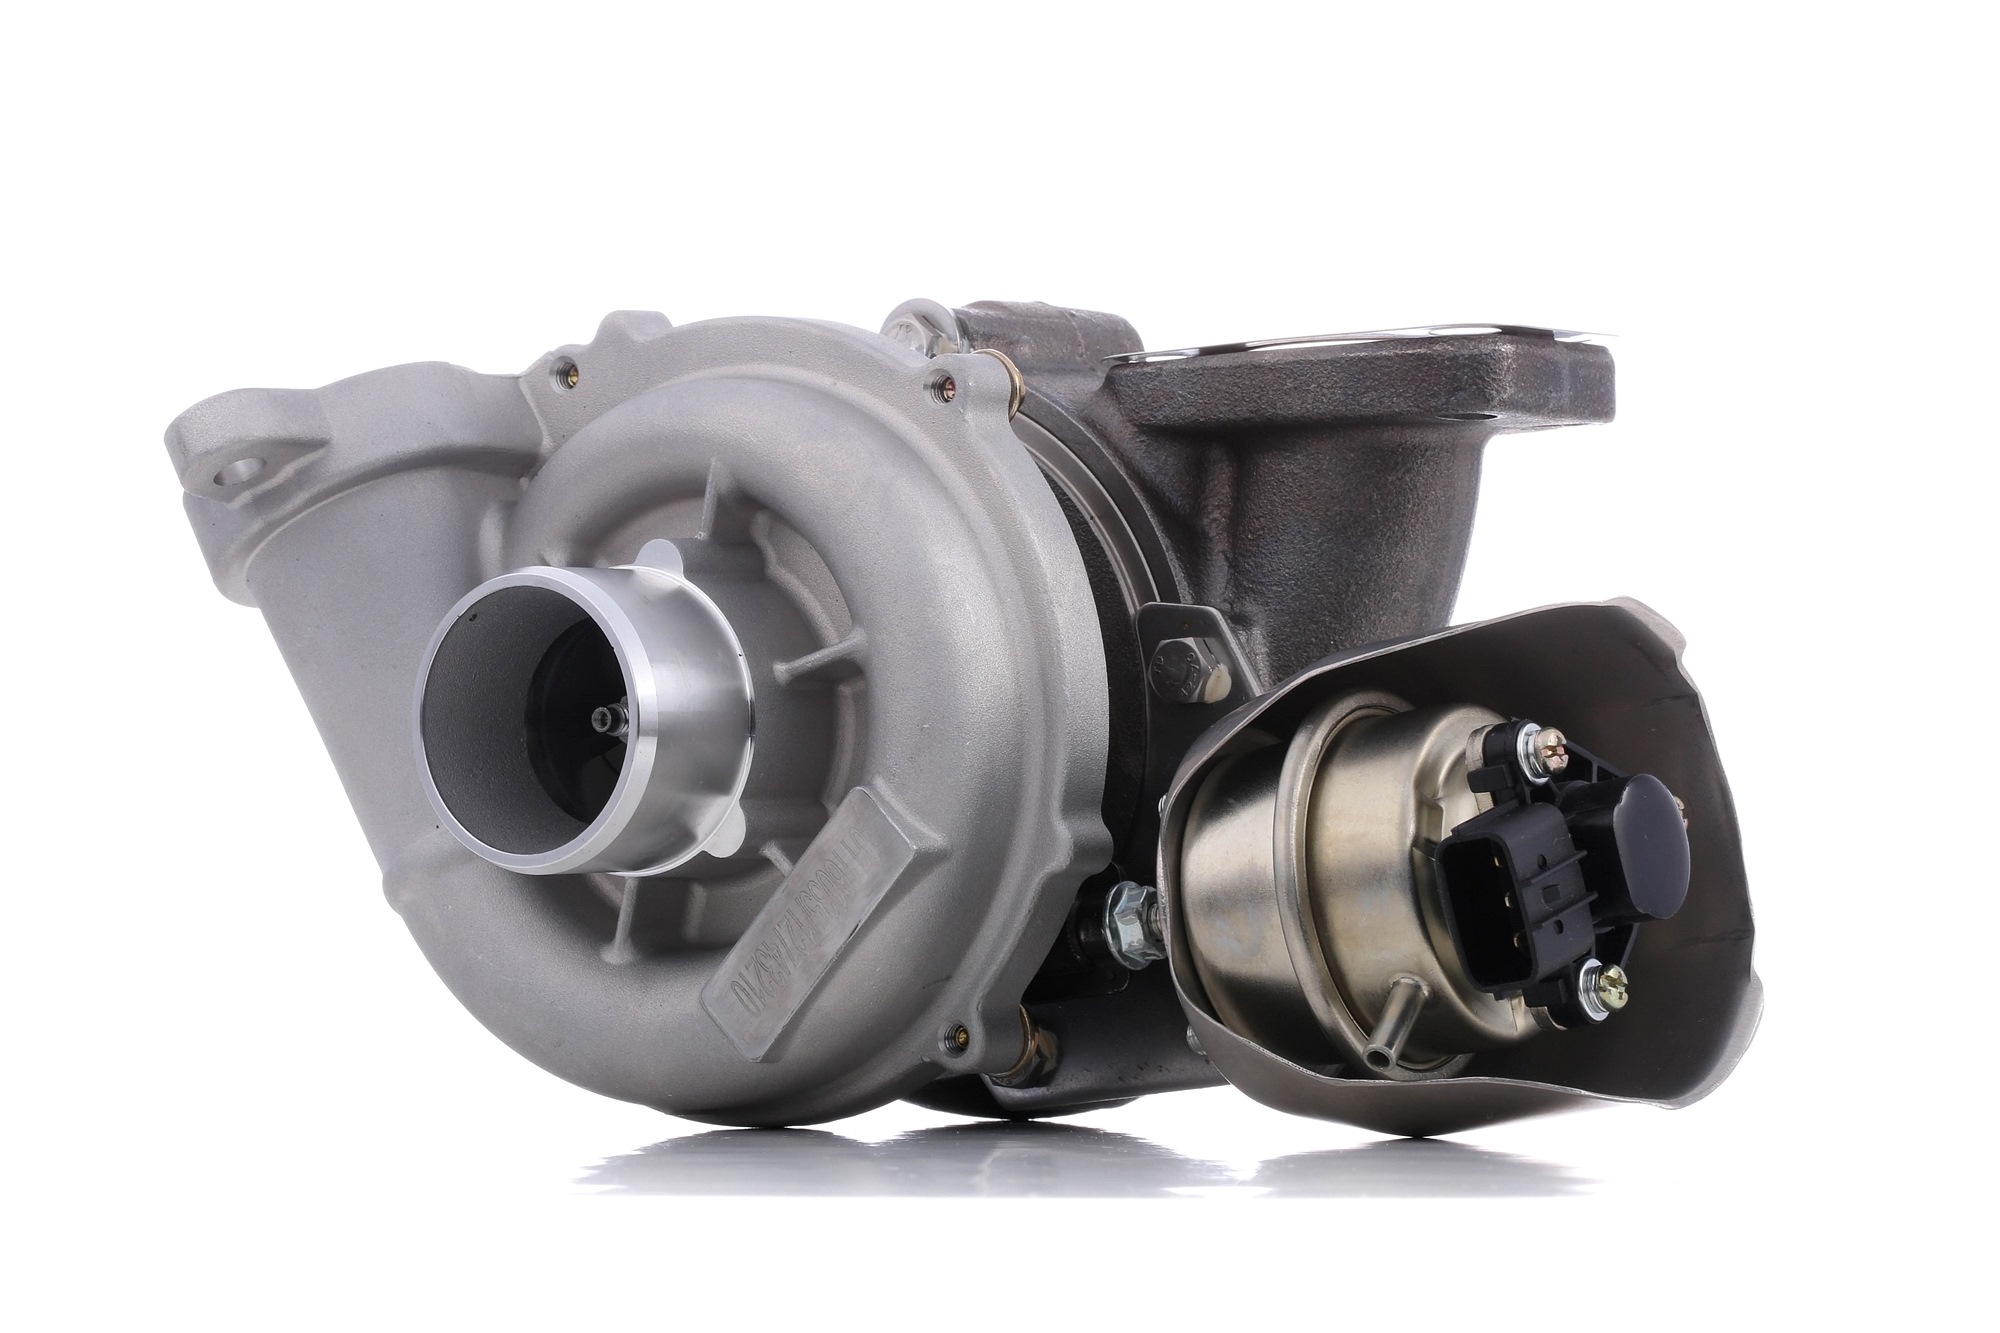 SKCT-1190058 STARK Turbocharger MINI Exhaust Turbocharger, Diesel, Euro 5, Electrically Controlled, Incl. Gasket Set